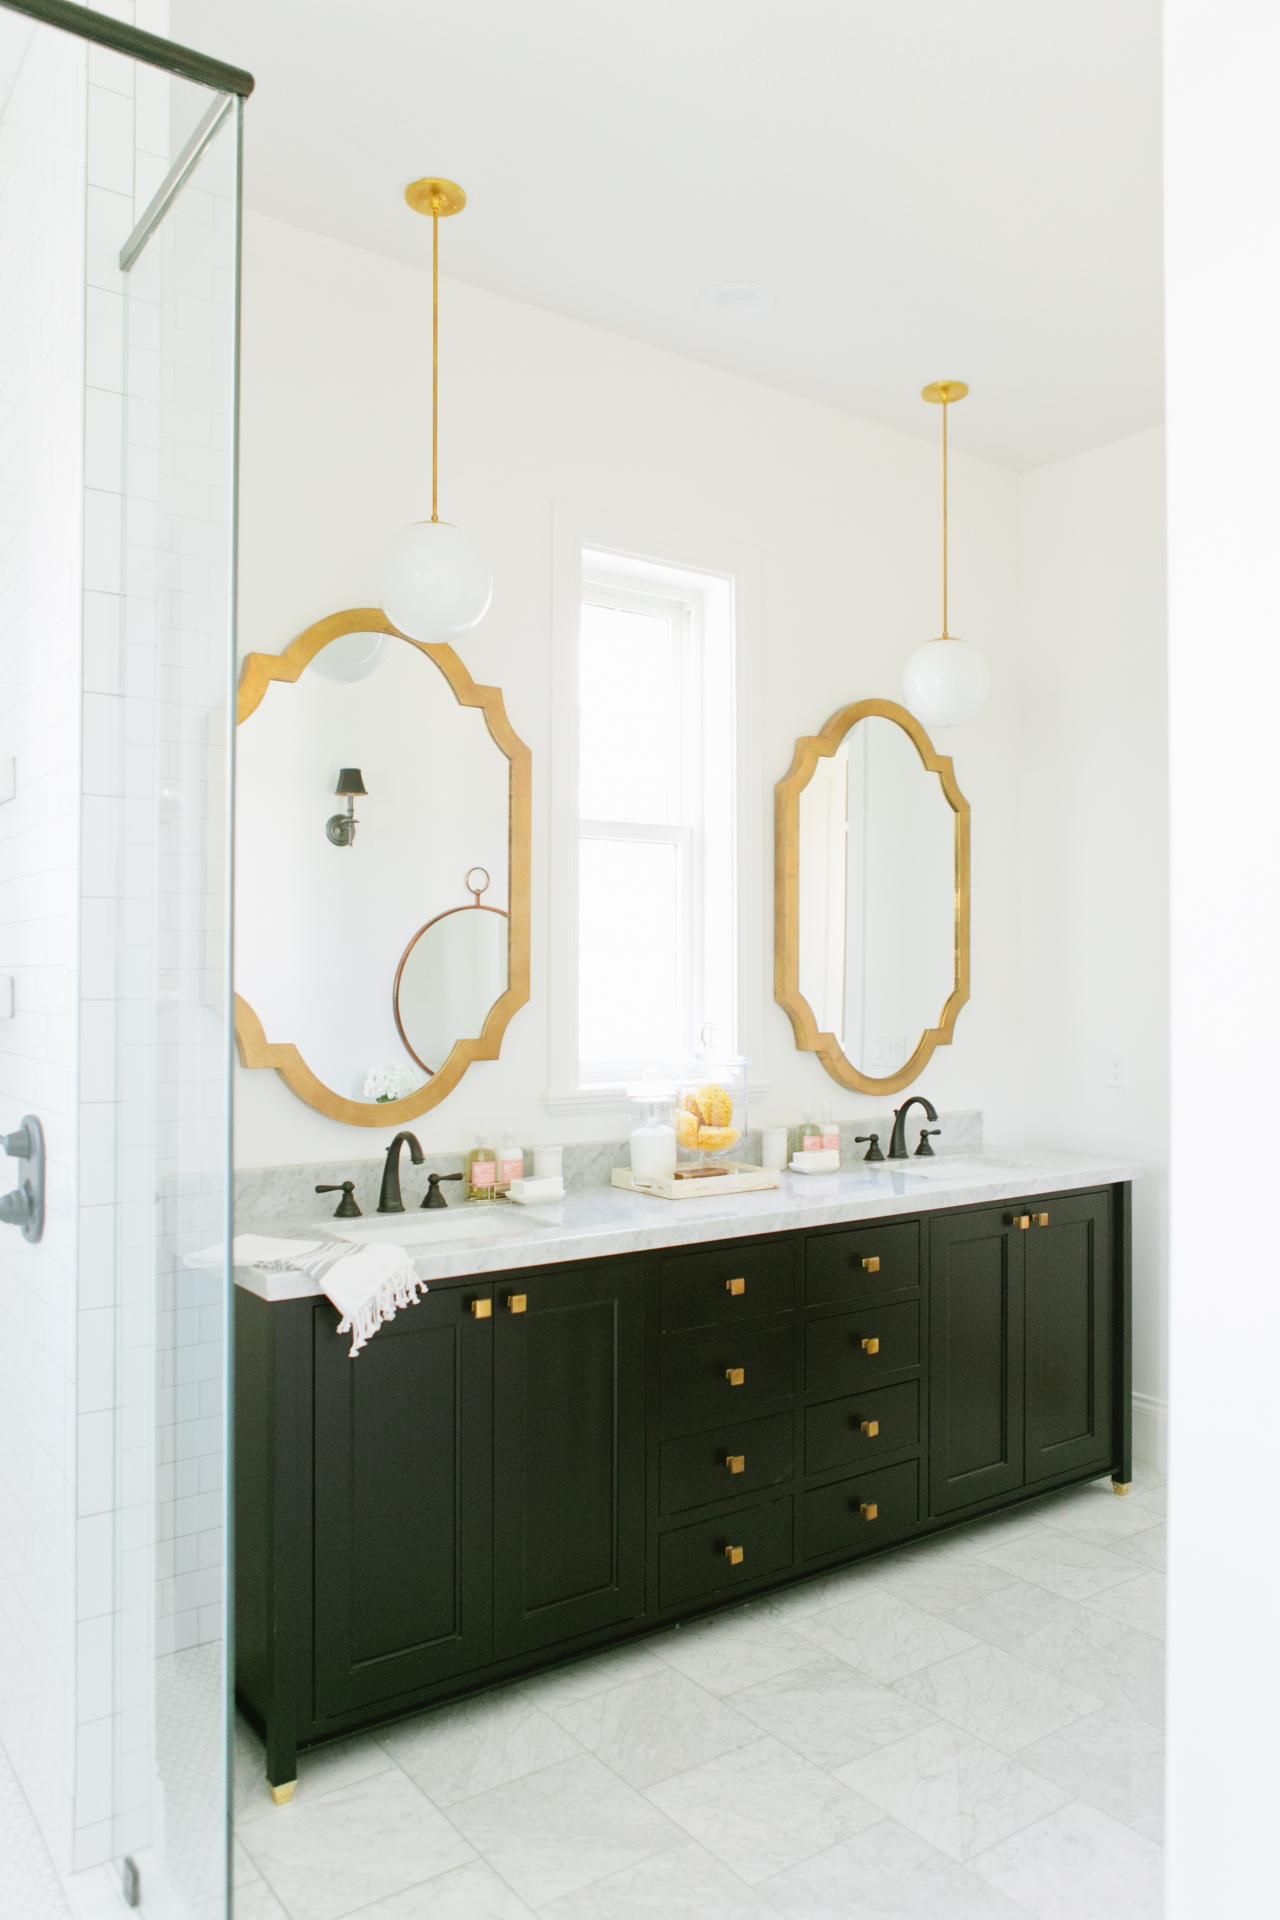 10 Powder Room Mirrors Ideas For Your Next Remodel Hgtv